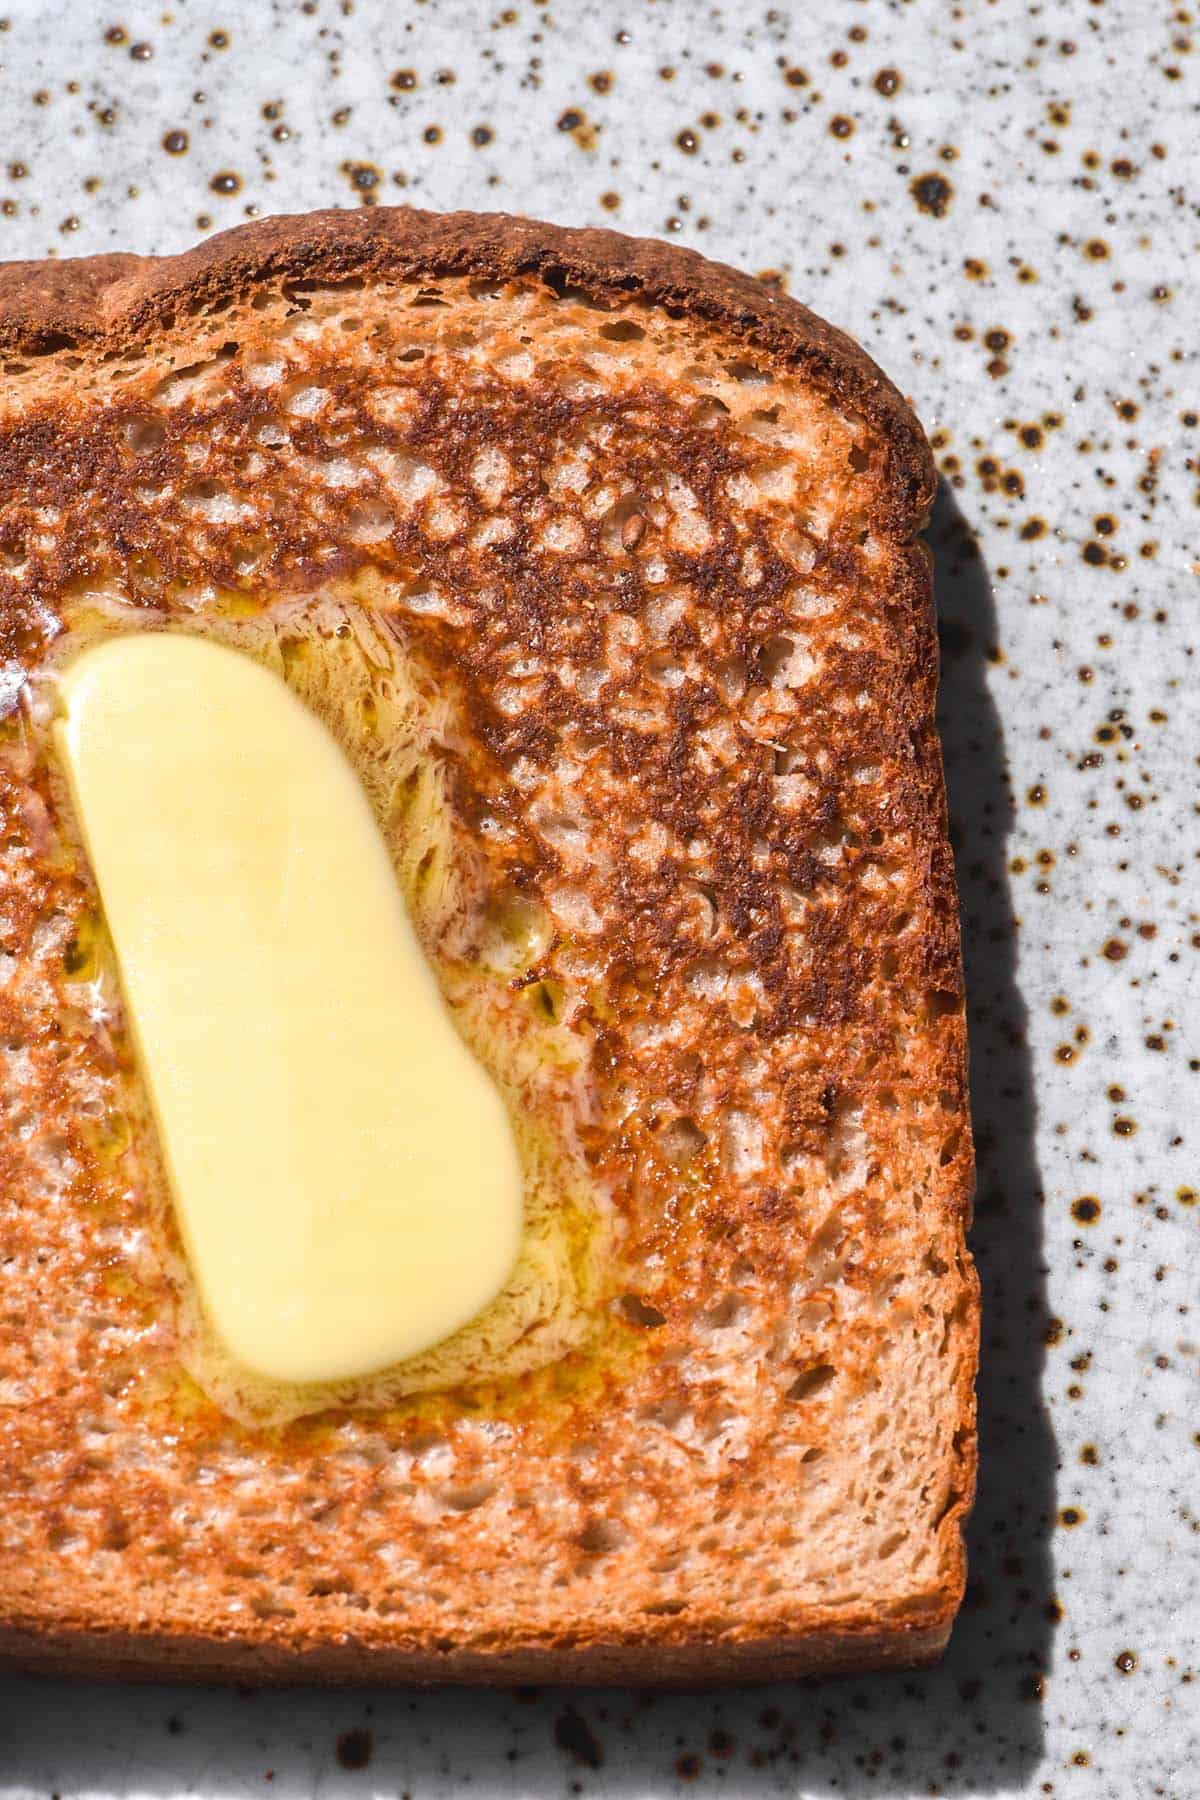 An aerial view of a slice of 100% buckwheat flour toast on a white speckled ceramic plate. The toast is golden brown and a slice of melting butter sits on top.